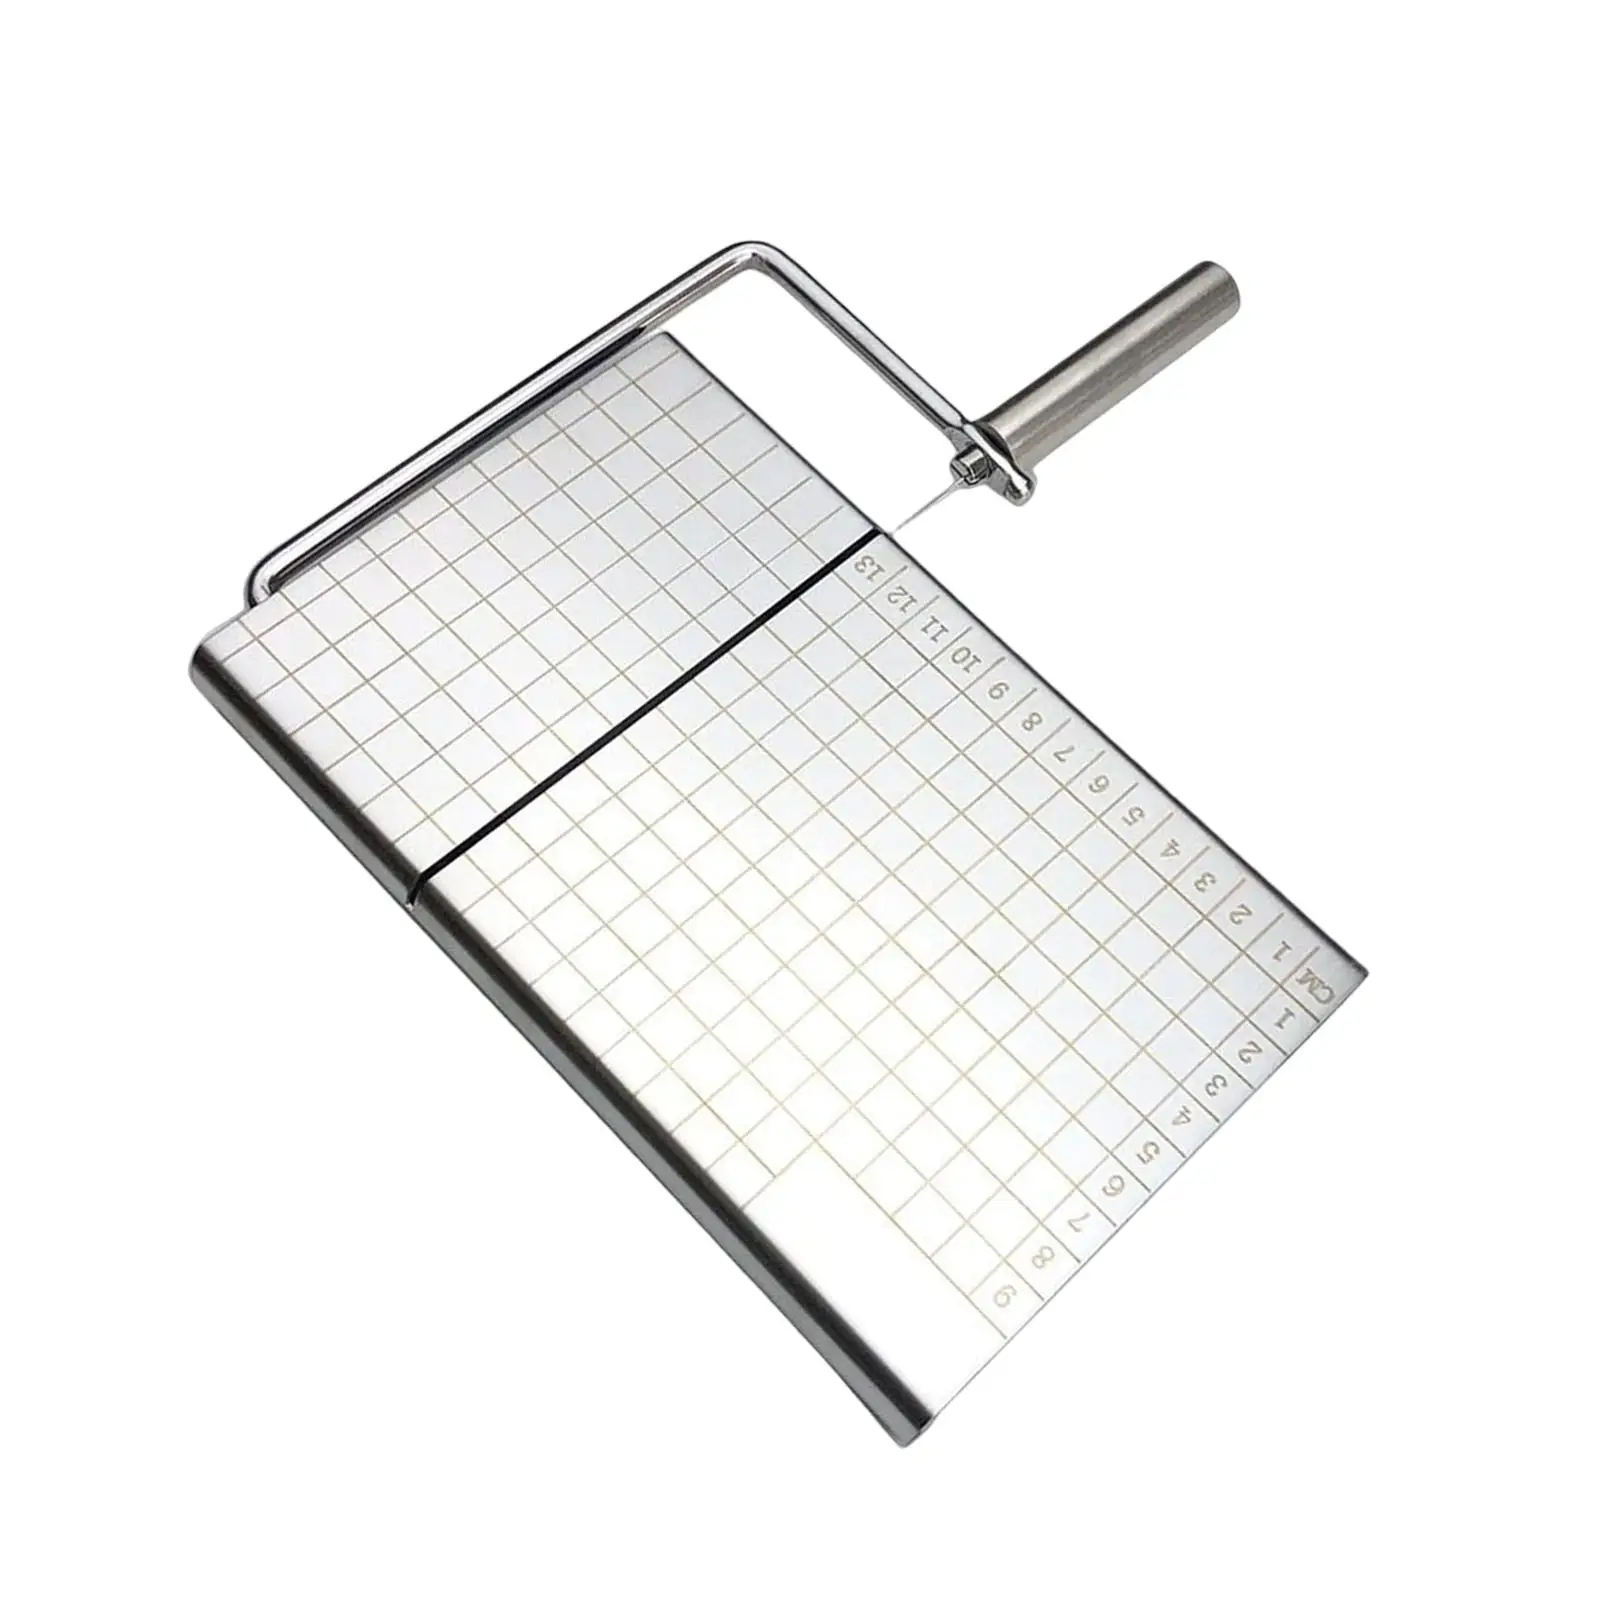 Cheese Slicer Board Precision Graduation Cheese Slicer Cutting Board Stainless Steel Butter Cutter for cheese